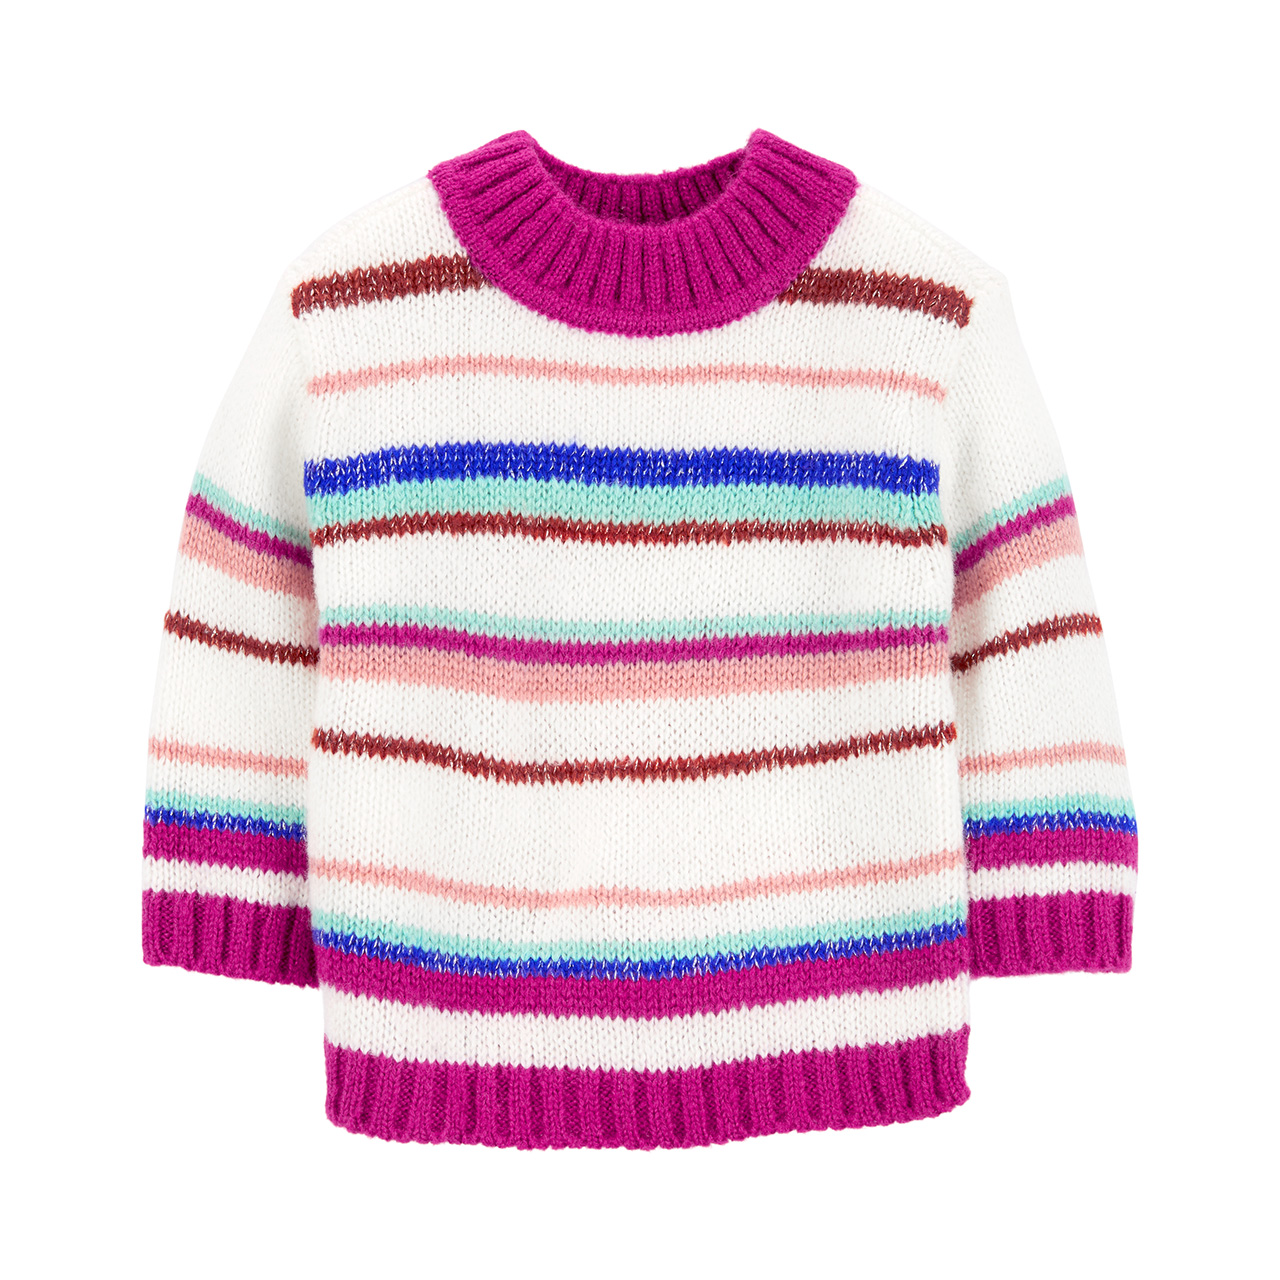 A sweater with pink, purple, blue and white stripes for babies.